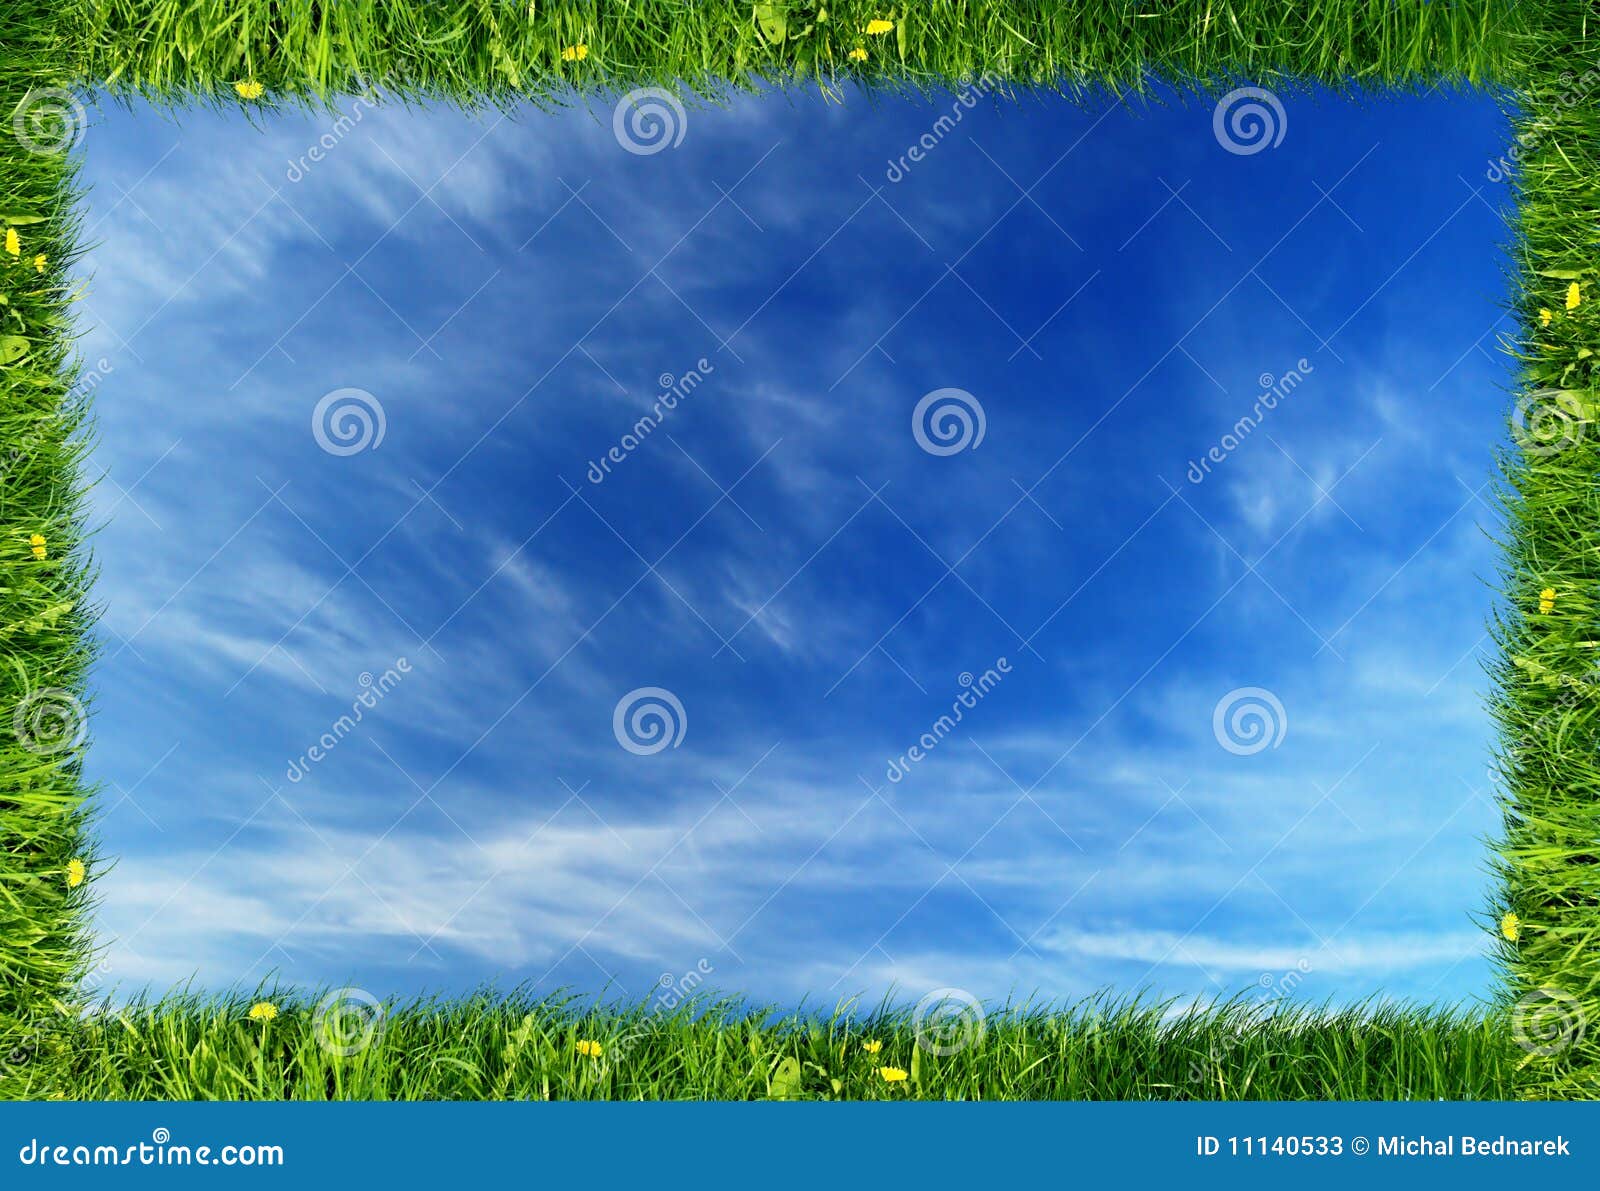 Nature frame background stock image. Image of clear, cloud - 11140533